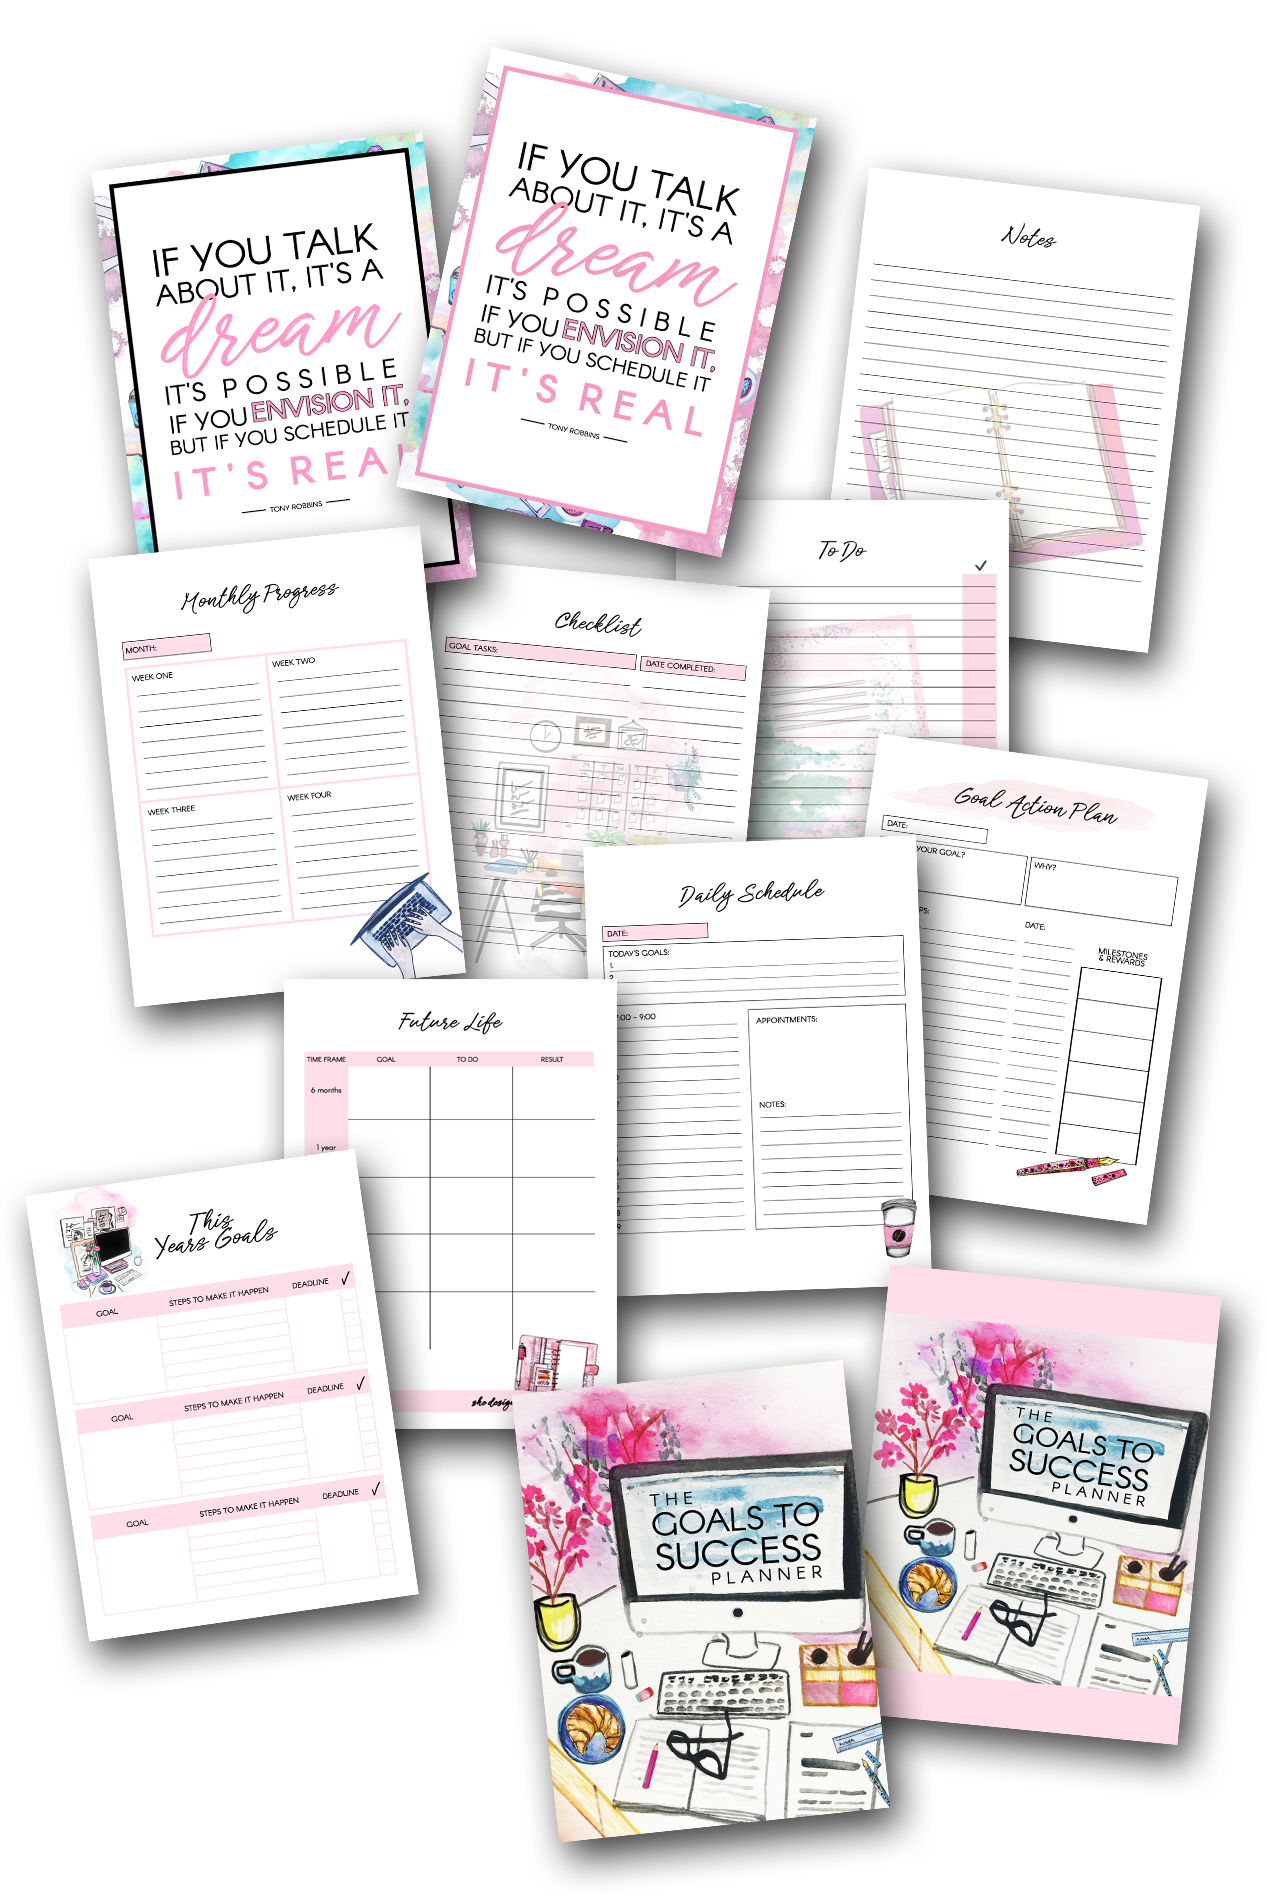 Simply Love PLR The Goals to Success Planner